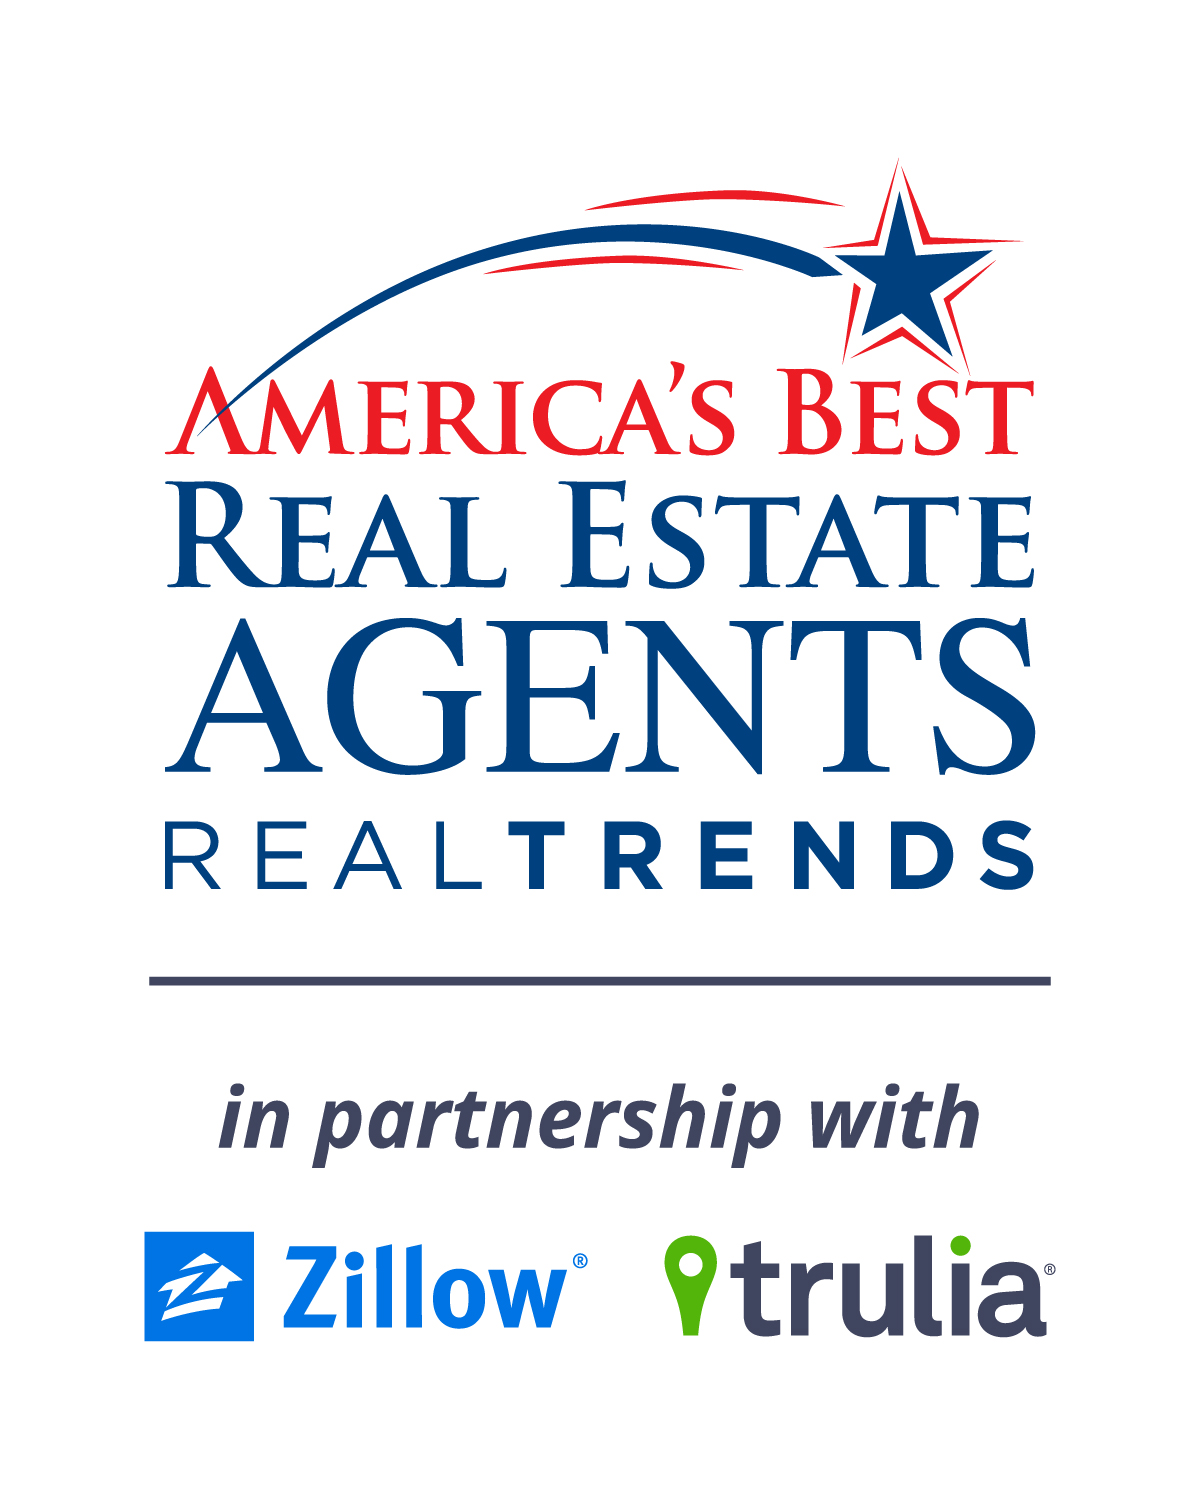 Real Trends Announces America's Best Real Estate Agents List REAL